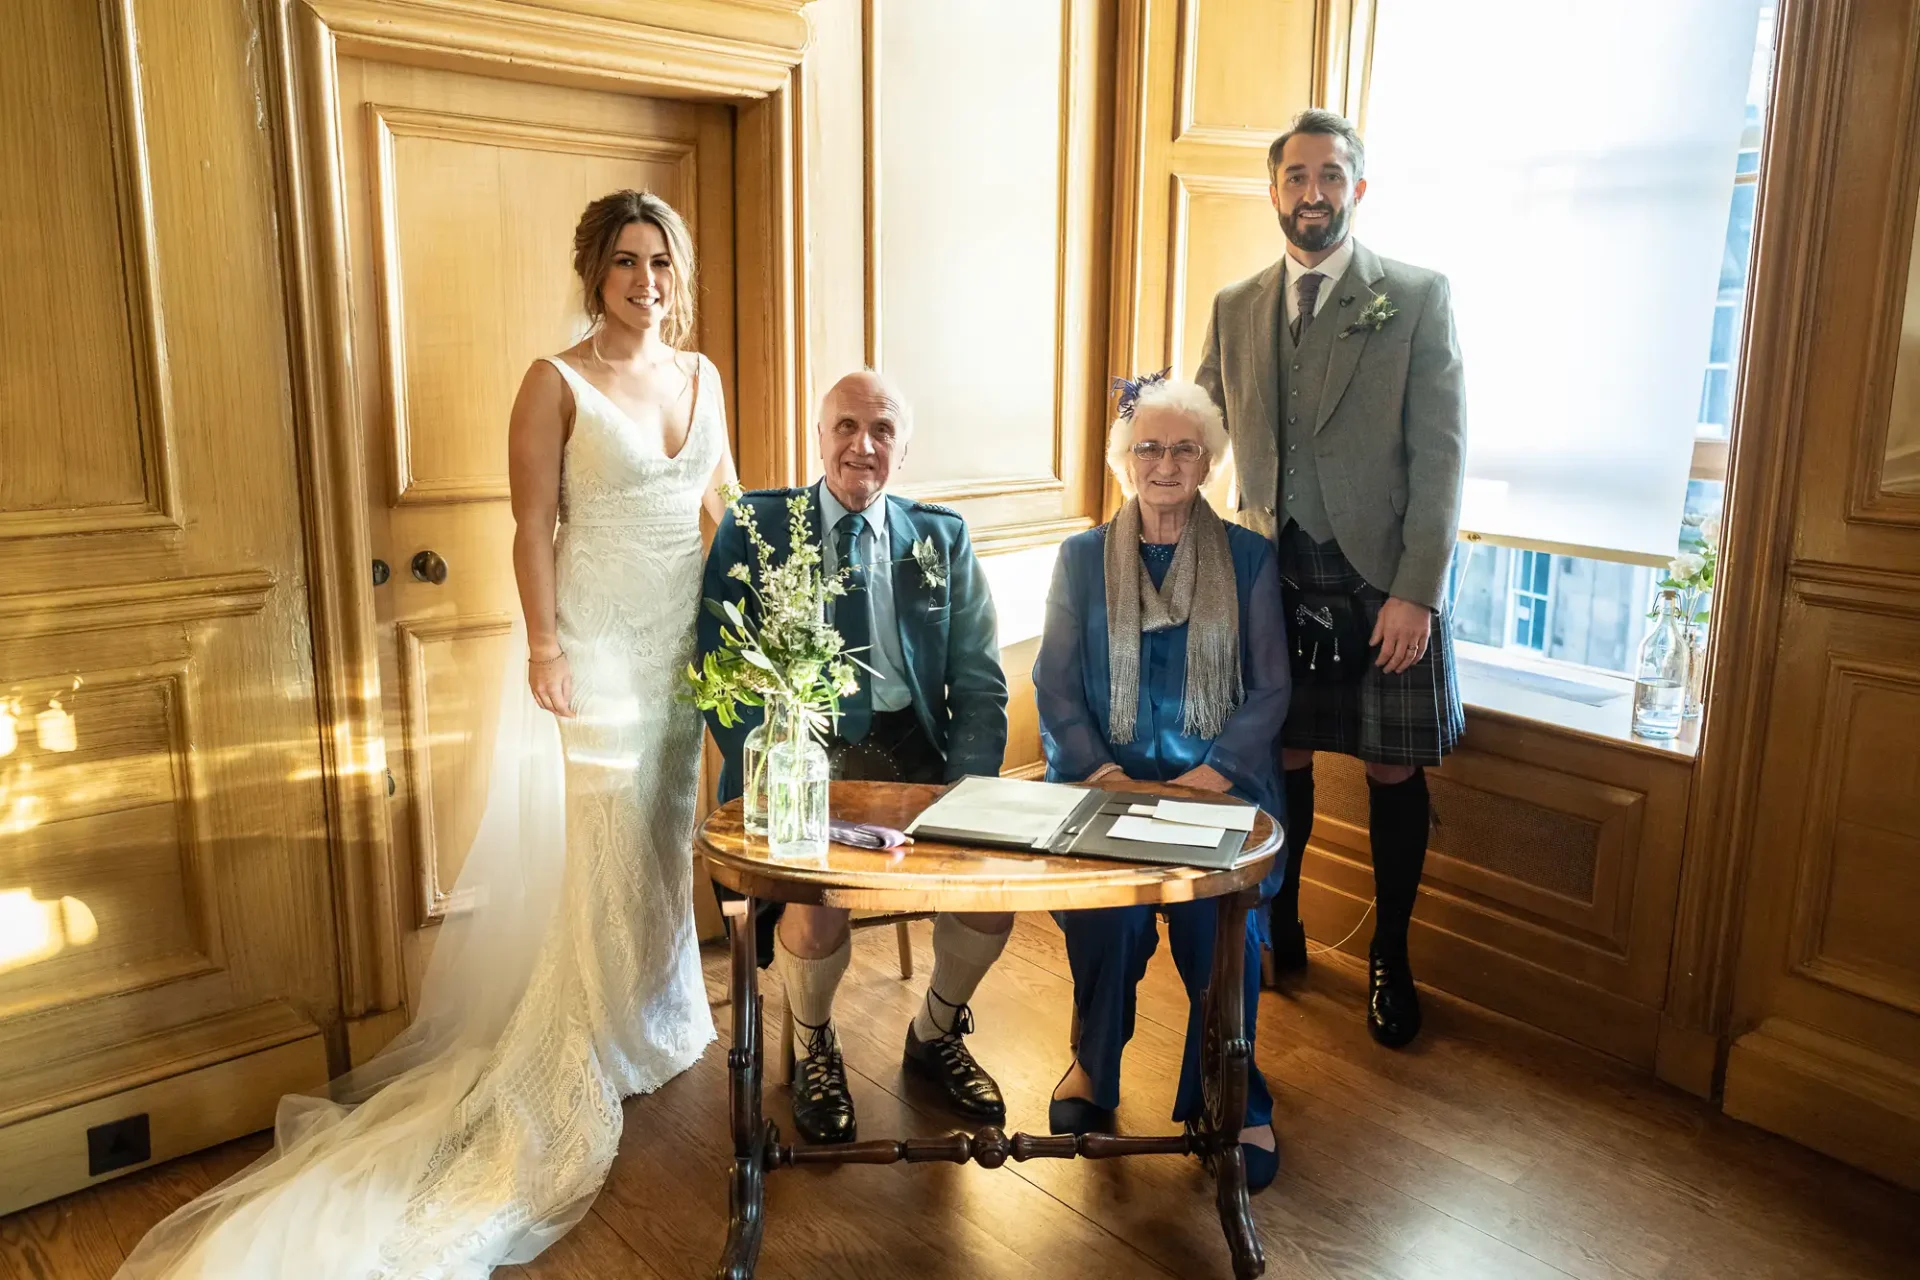 A bride and groom stand beside an elderly couple seated at a table with a floral arrangement in a warmly lit room.